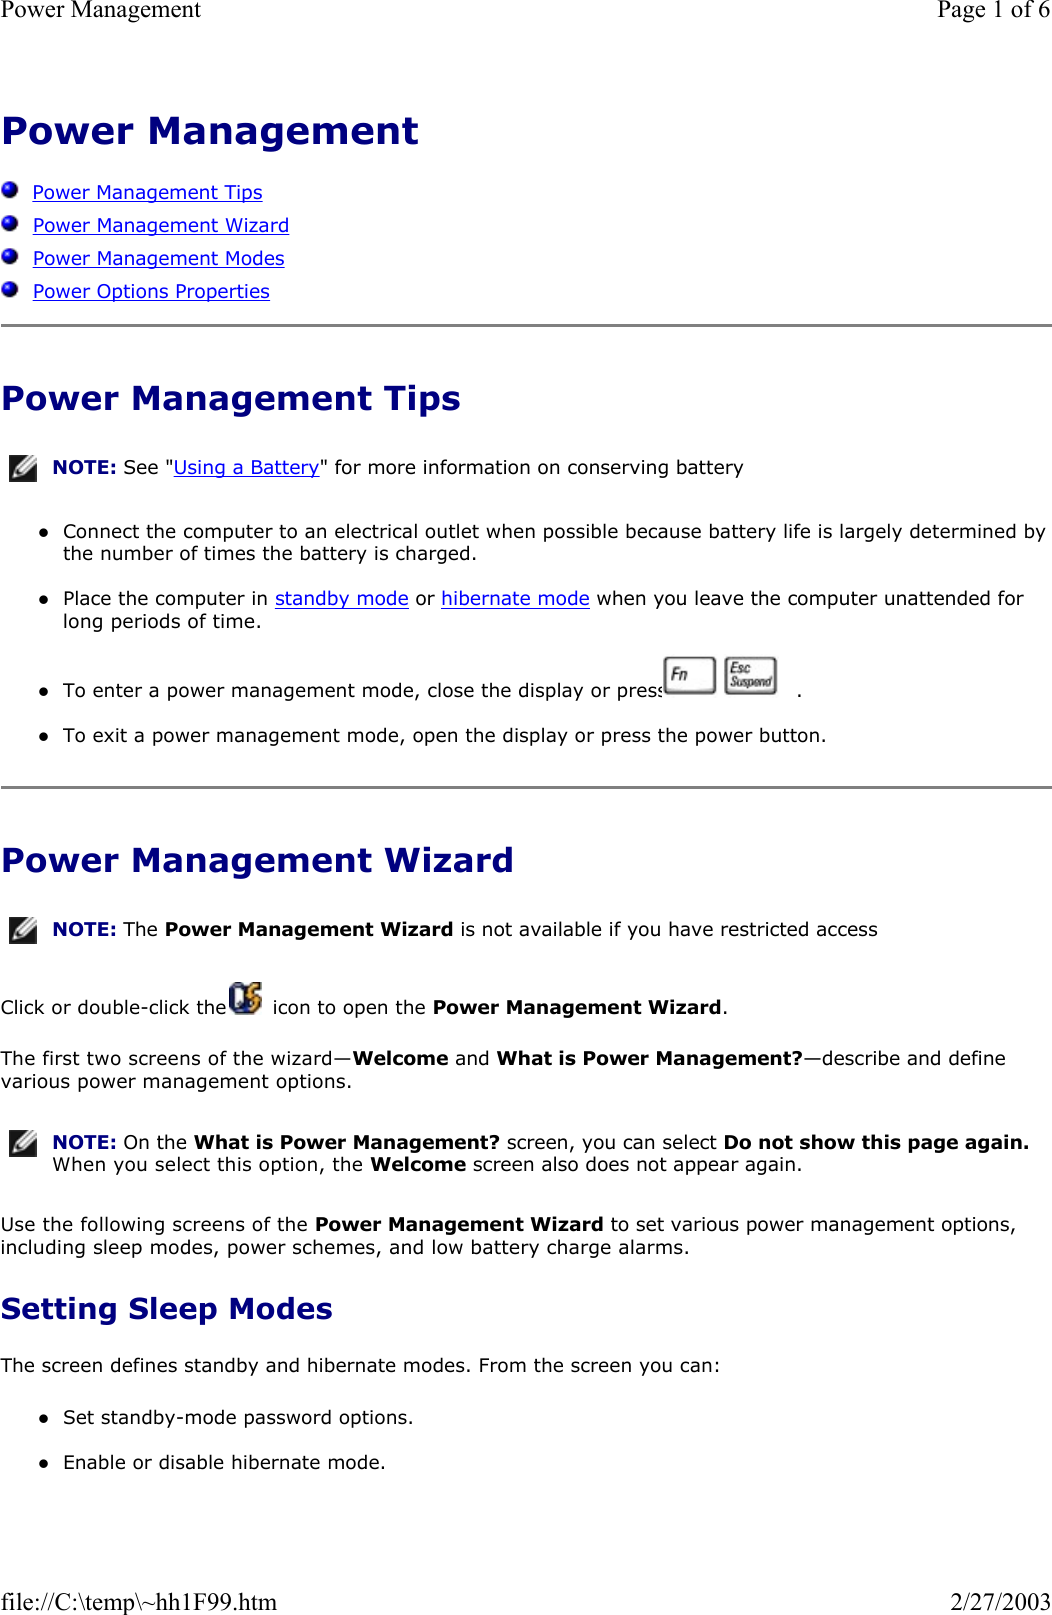 Power Management      Power Management Tips   Power Management Wizard   Power Management Modes   Power Options Properties Power Management Tips zConnect the computer to an electrical outlet when possible because battery life is largely determined by the number of times the battery is charged.  zPlace the computer in standby mode or hibernate mode when you leave the computer unattended for long periods of time.  zTo enter a power management mode, close the display or press     .  zTo exit a power management mode, open the display or press the power button.  Power Management Wizard Click or double-click the   icon to open the Power Management Wizard. The first two screens of the wizard—Welcome and What is Power Management?—describe and define various power management options. Use the following screens of the Power Management Wizard to set various power management options, including sleep modes, power schemes, and low battery charge alarms. Setting Sleep Modes The screen defines standby and hibernate modes. From the screen you can: zSet standby-mode password options.  zEnable or disable hibernate mode.  NOTE: See &quot;Using a Battery&quot; for more information on conserving battery NOTE: The Power Management Wizard is not available if you have restricted access NOTE: On the What is Power Management? screen, you can select Do not show this page again. When you select this option, the Welcome screen also does not appear again.Page 1 of 6Power Management2/27/2003file://C:\temp\~hh1F99.htm